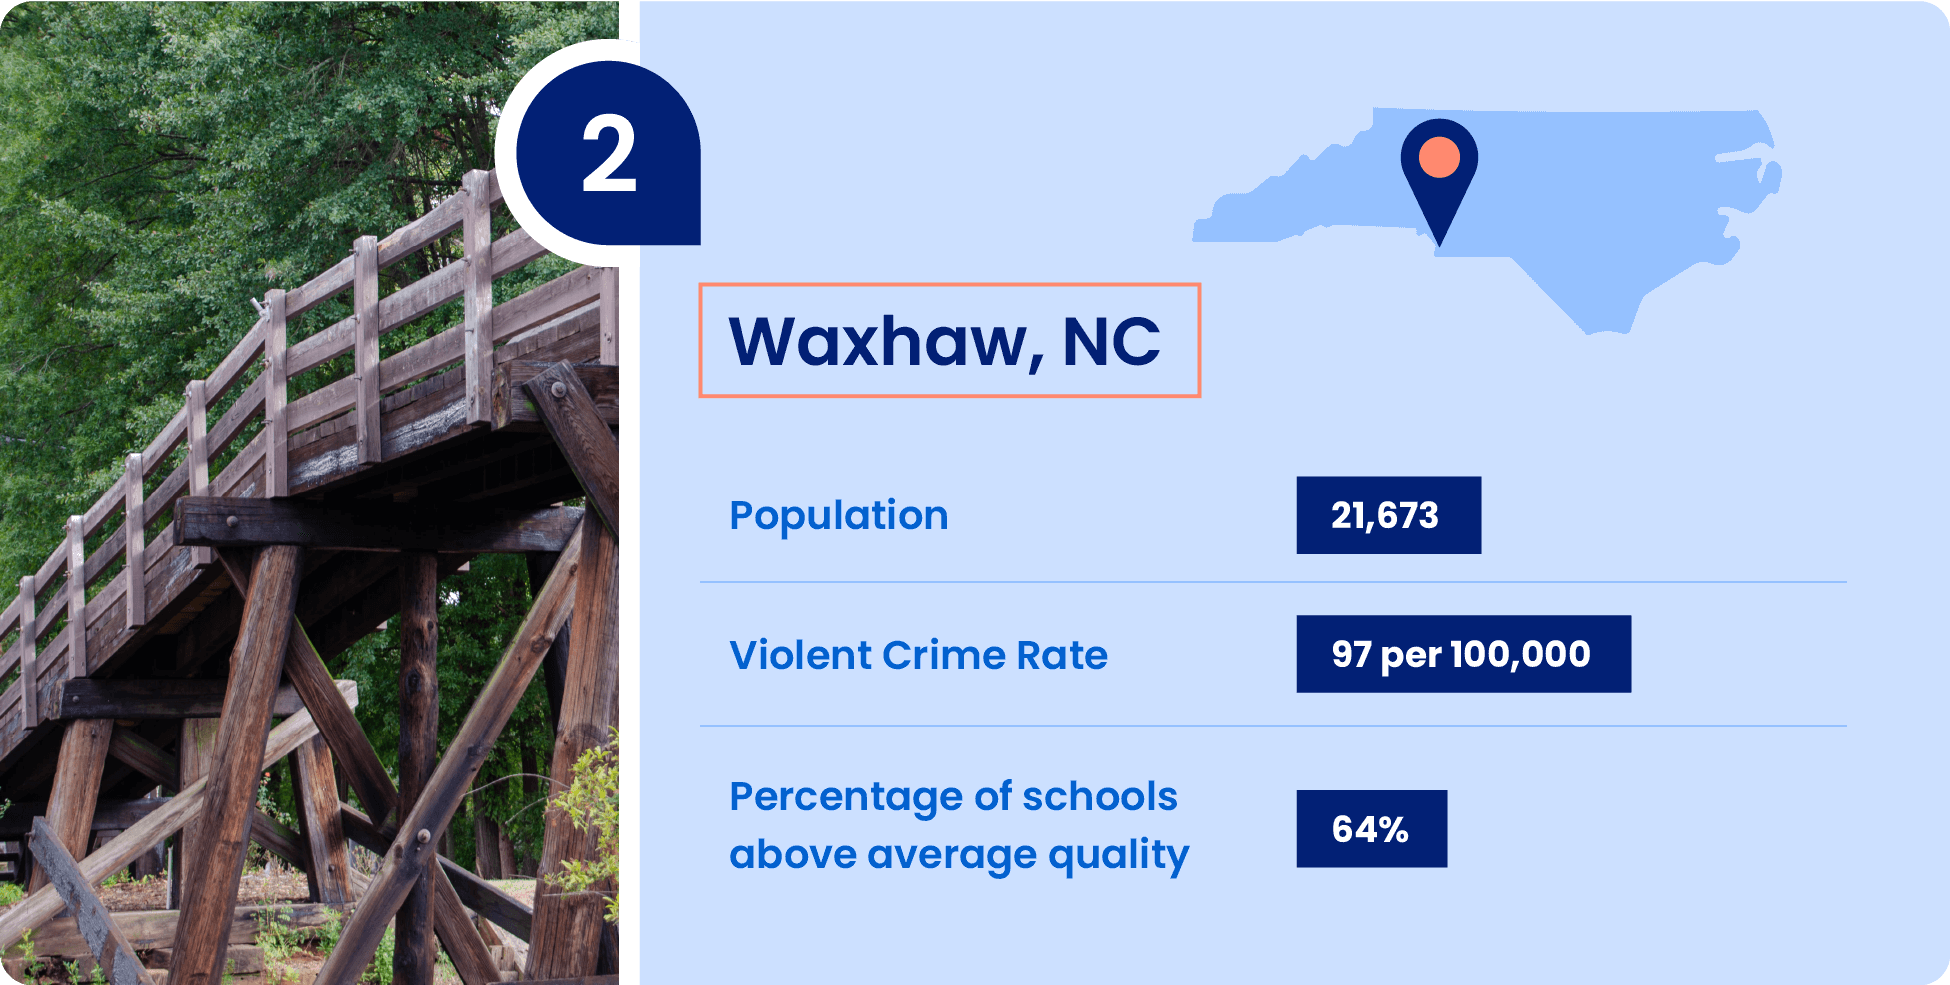 Image shows key information that make Waxhaw, North Carolina a great place to raise a family.